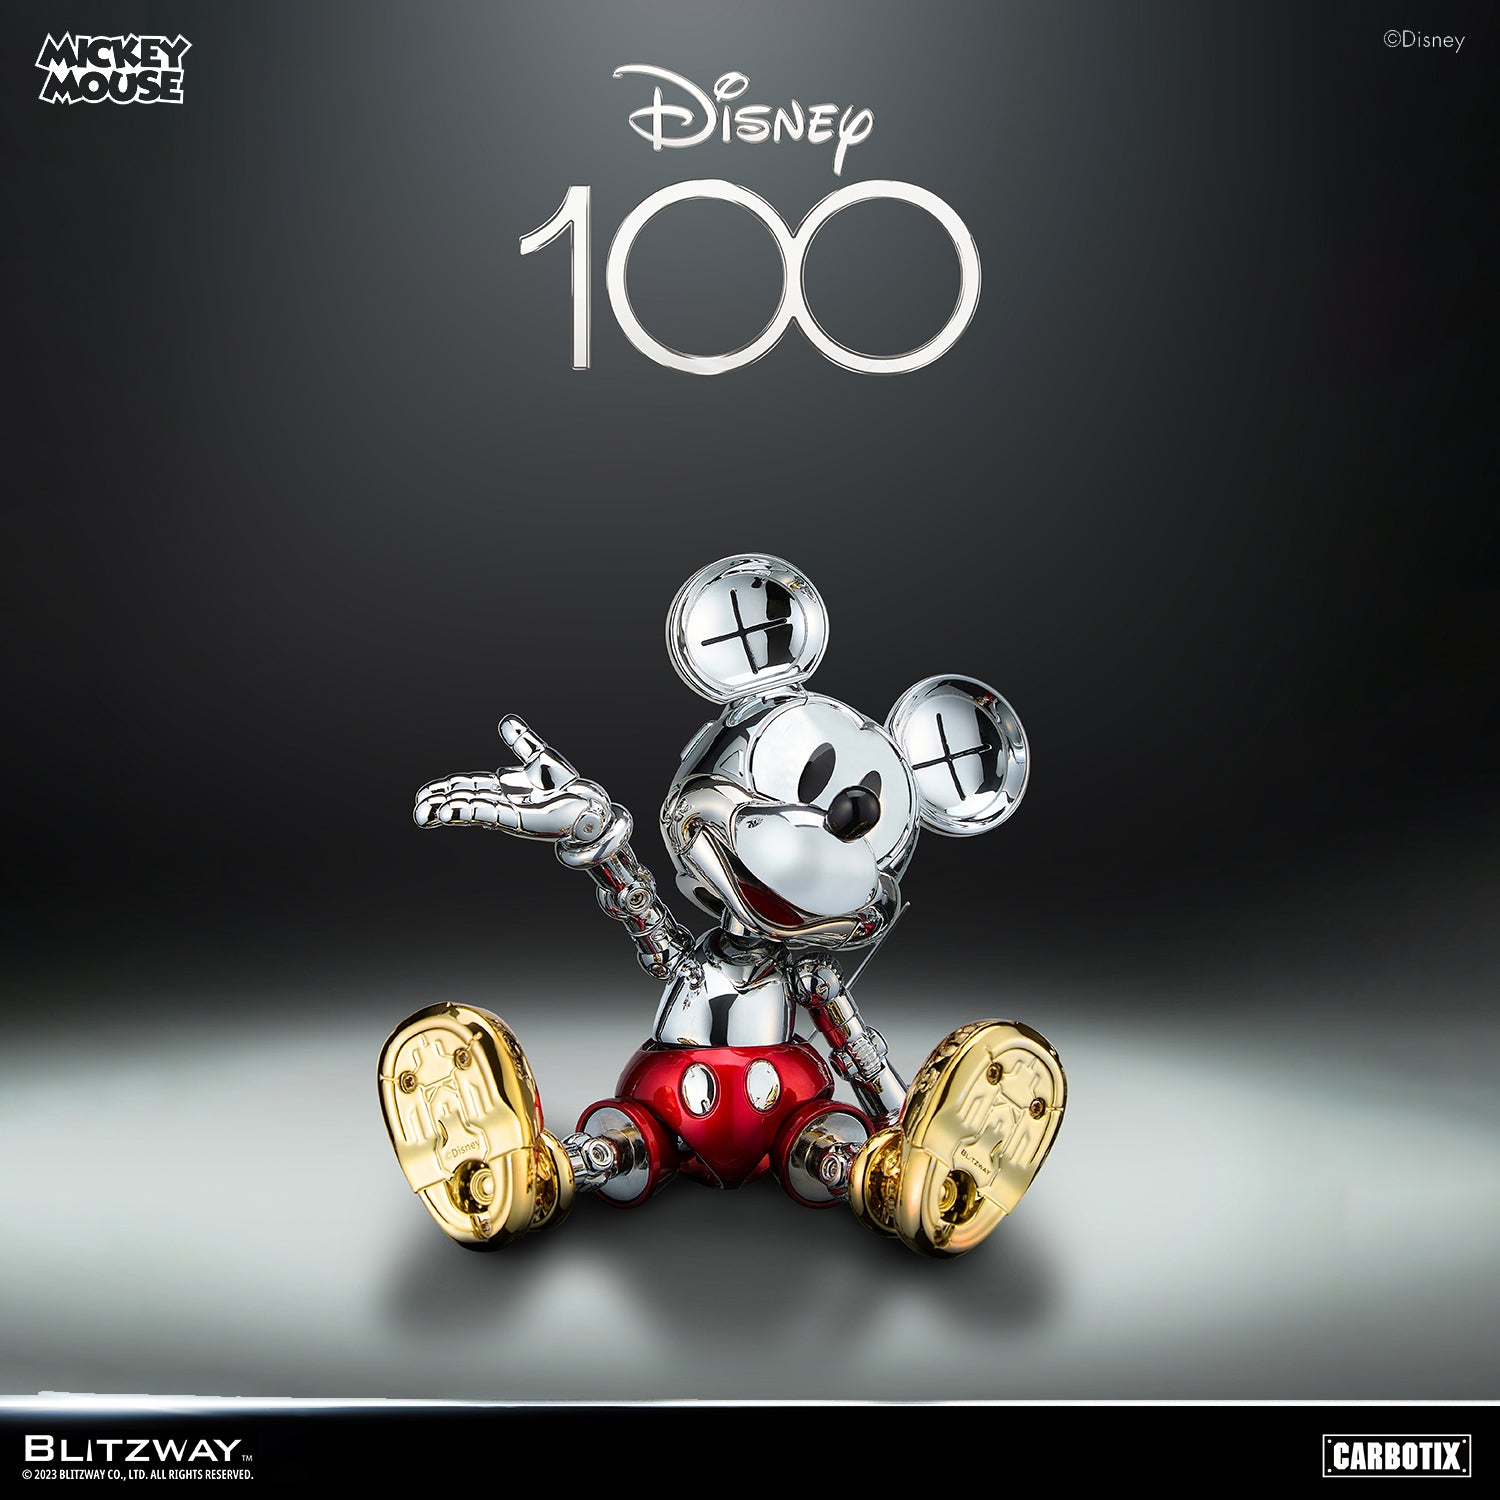 Blitzway - Carbotix Series - Disney D100 Mickey Mouse (Chrome Ver.) (Limited Edition) - Marvelous Toys